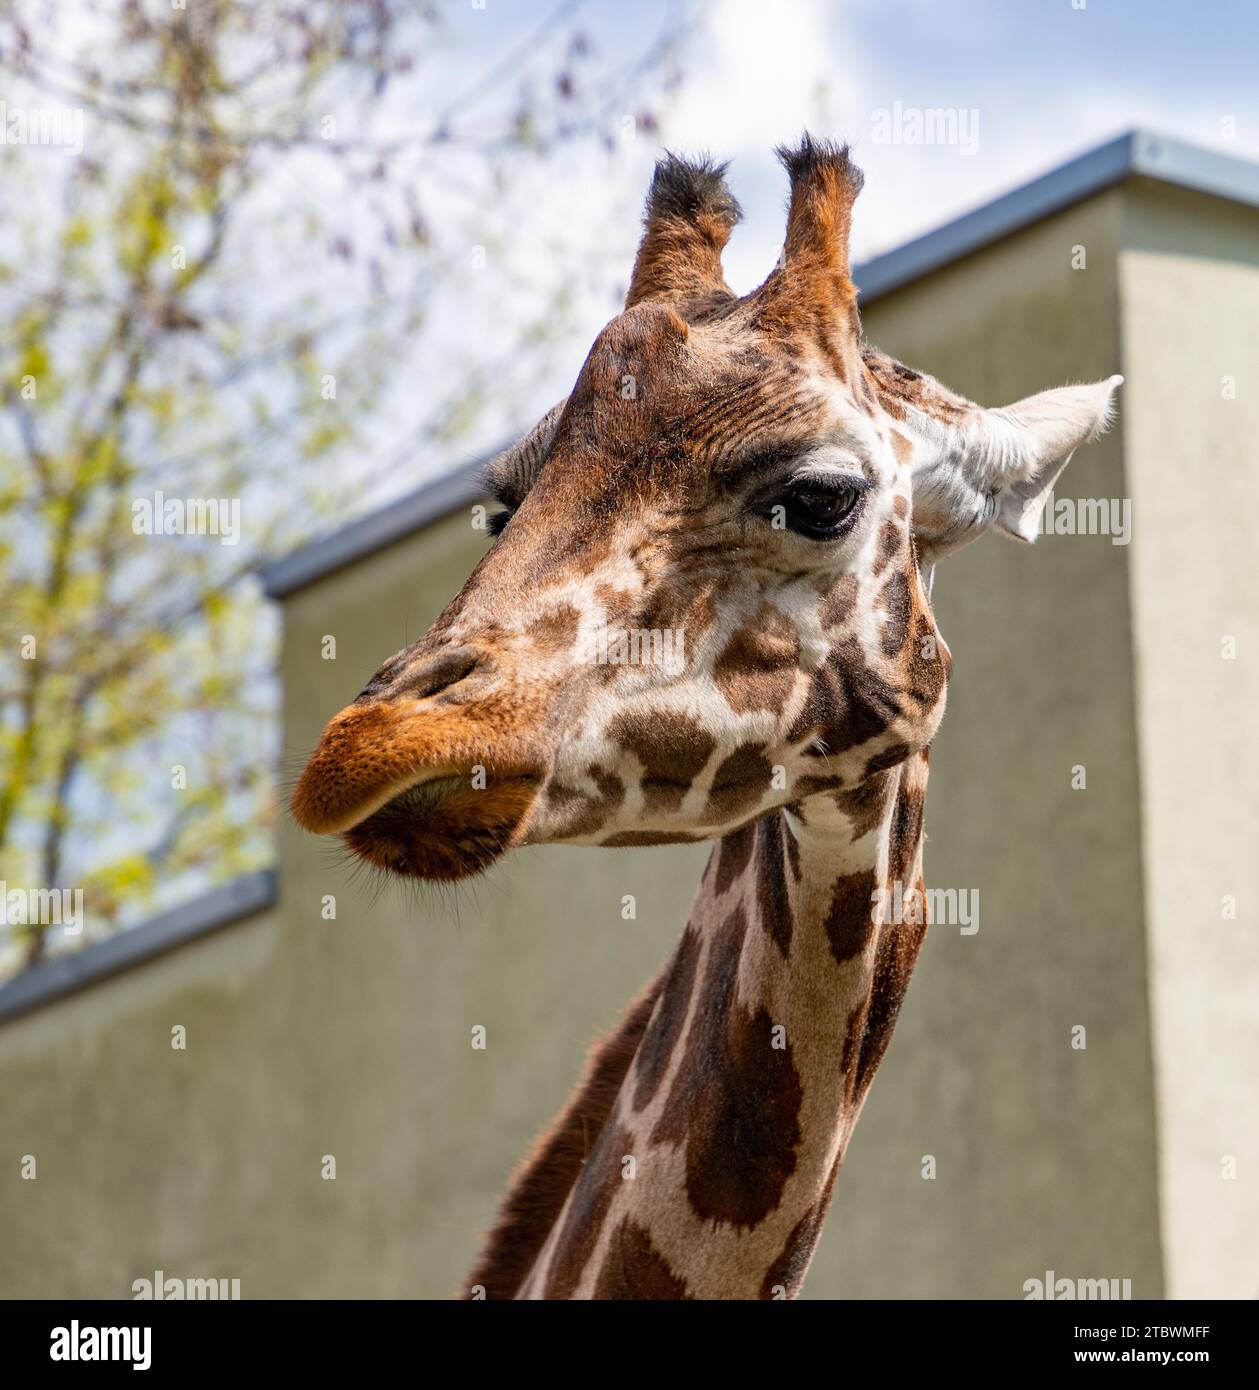 A picture of a Nubian Giraffe at the Orientarium ZOO ?od? Stock Photo